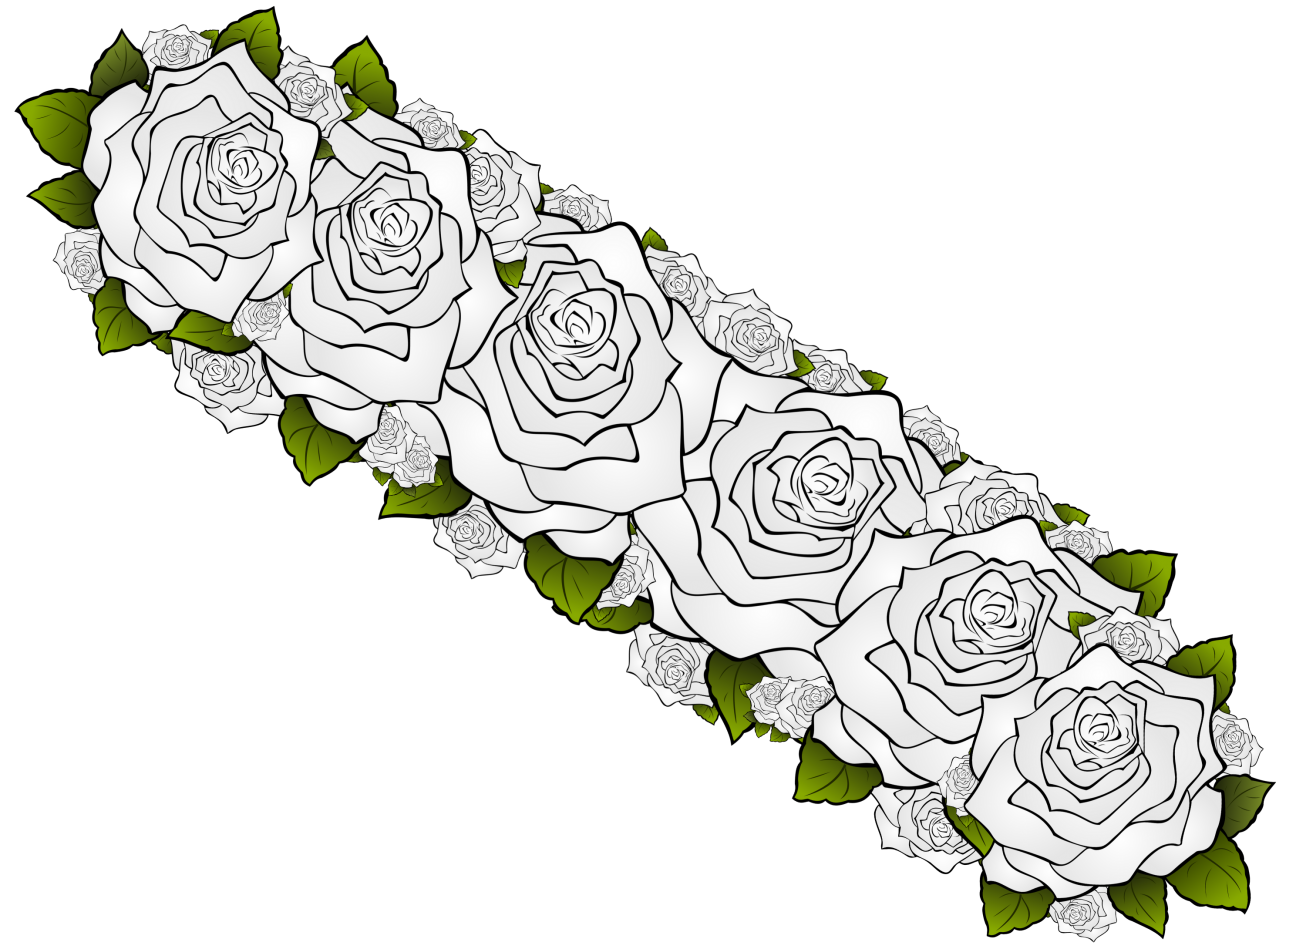 A straight flower crown composed of white flowers with green leaves